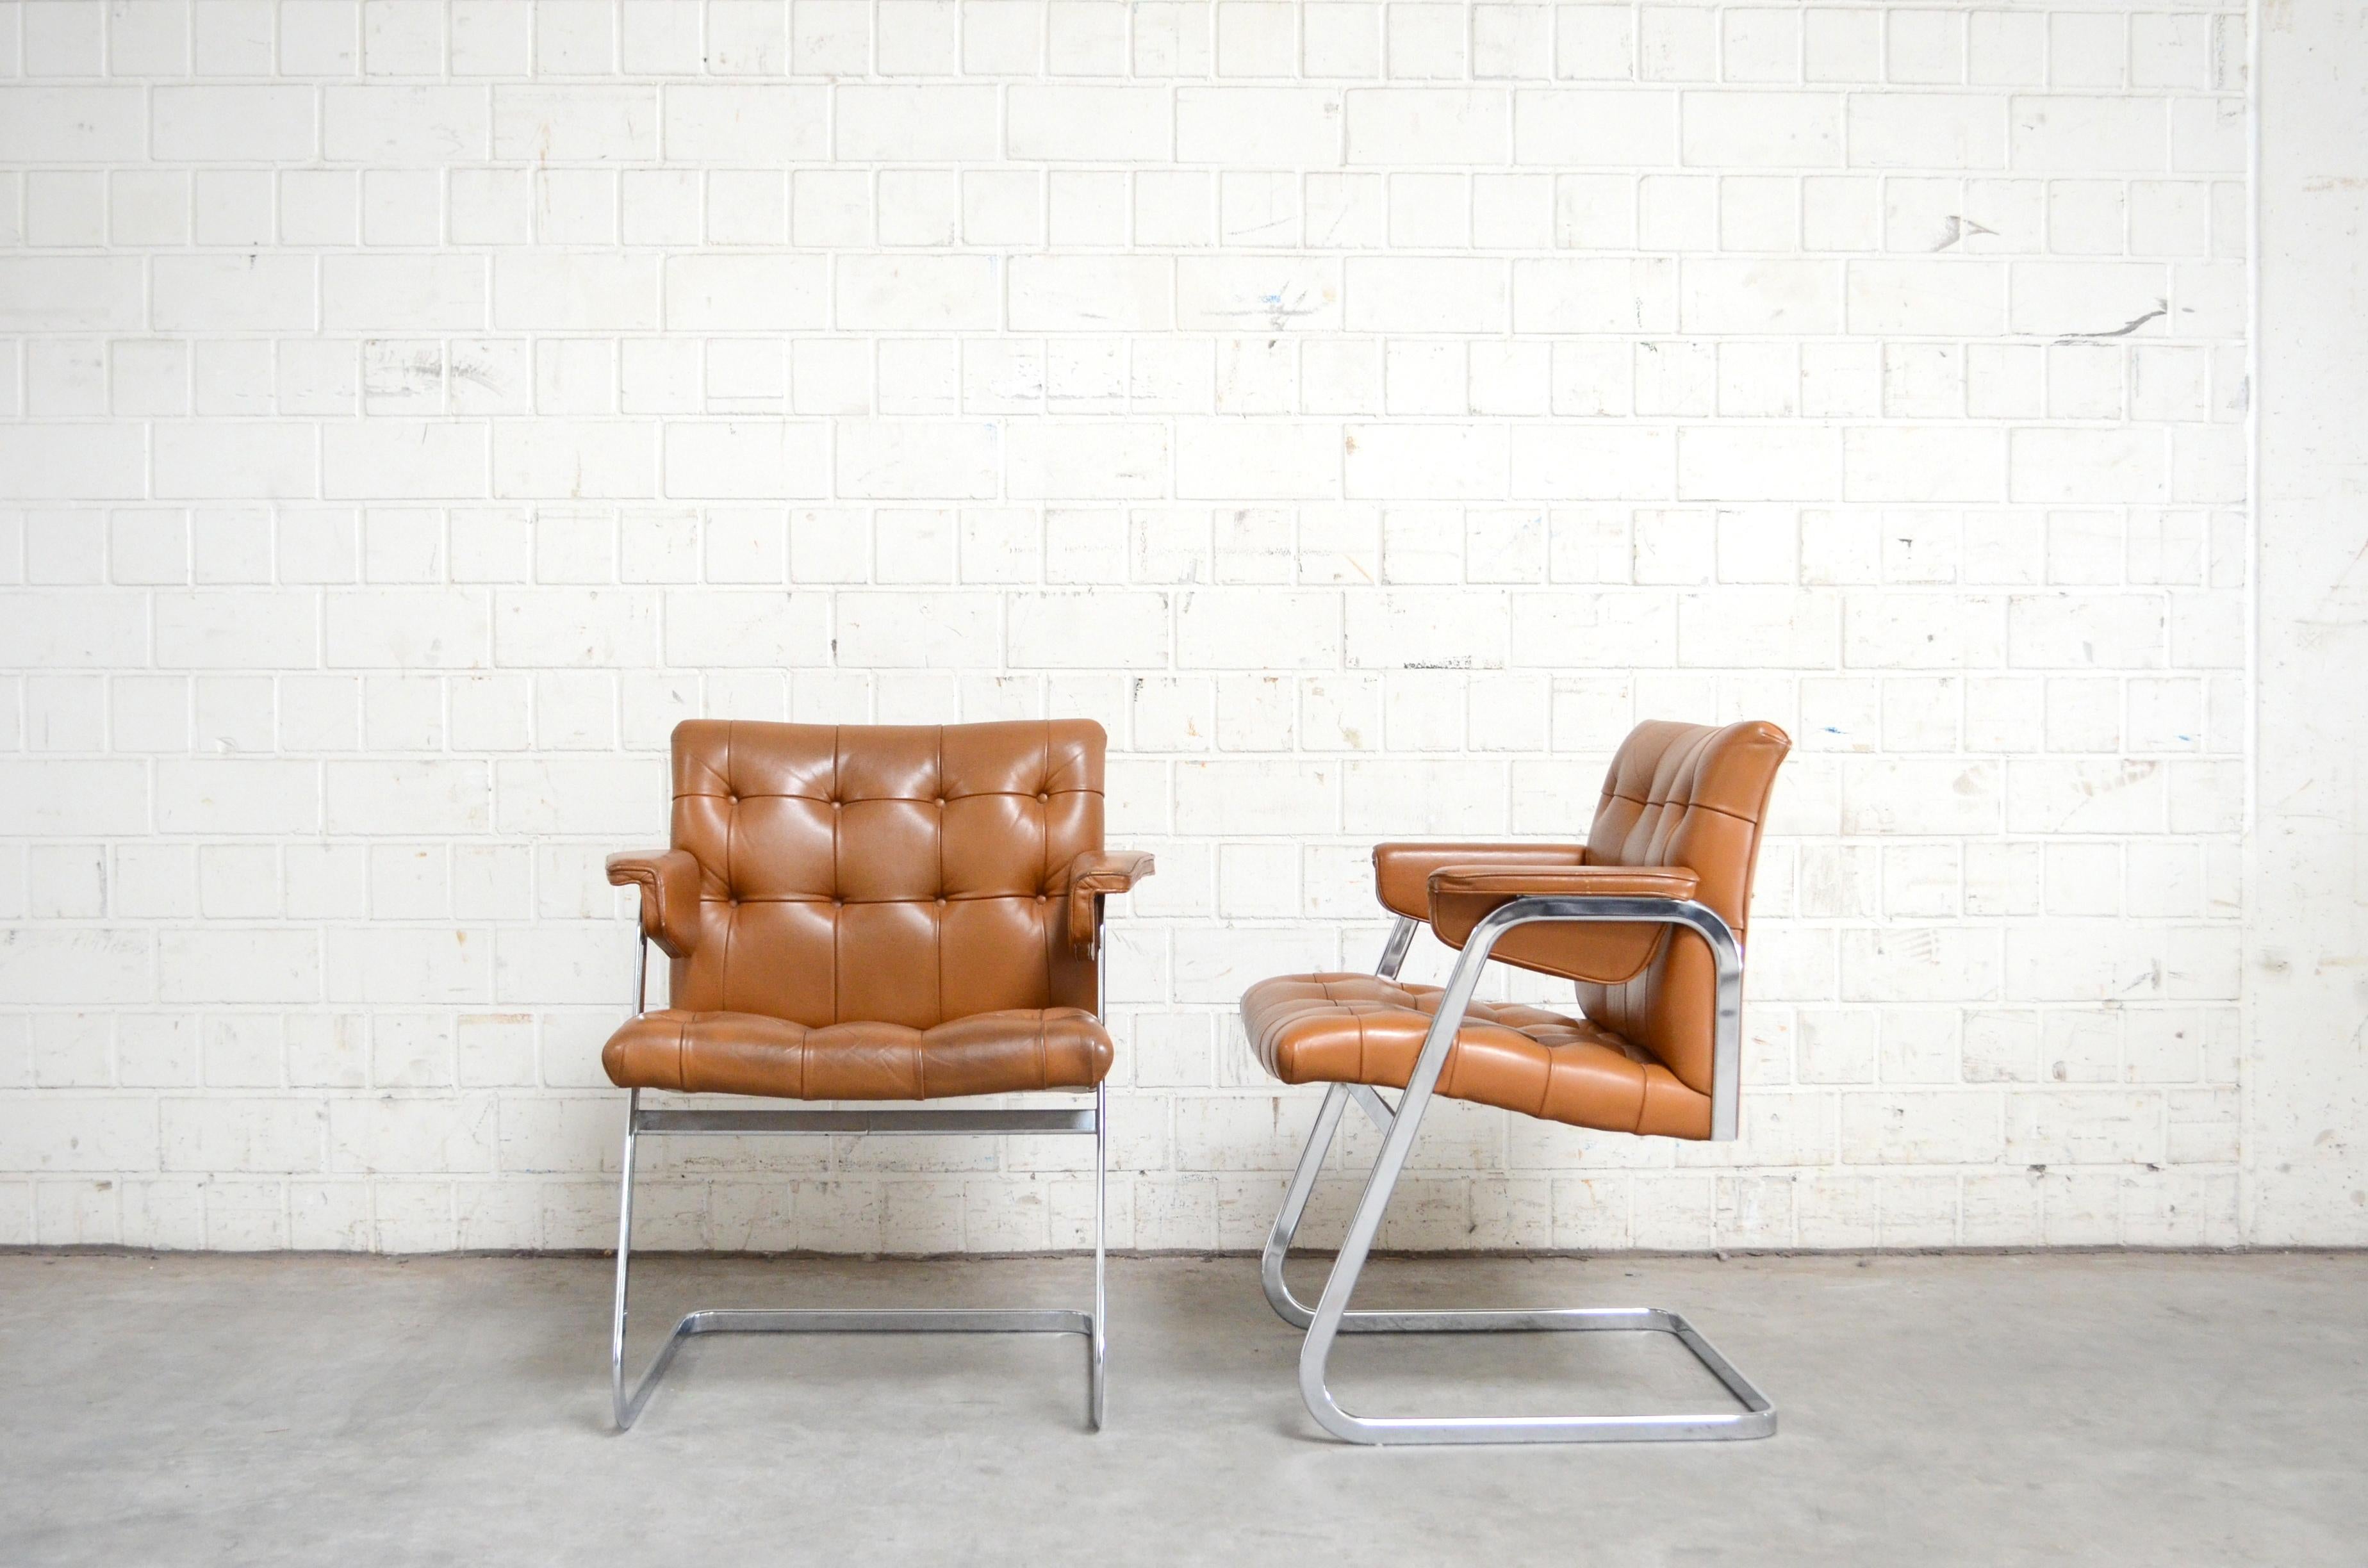 Robert Haussmann RH 305 armchairs design of 1957 and manufactured by De Sede.
Brandy cognac leather. The leather was recoloured some years ago from a leather company.
This version from 1970s is very rare version with Softpad armrests.
The design